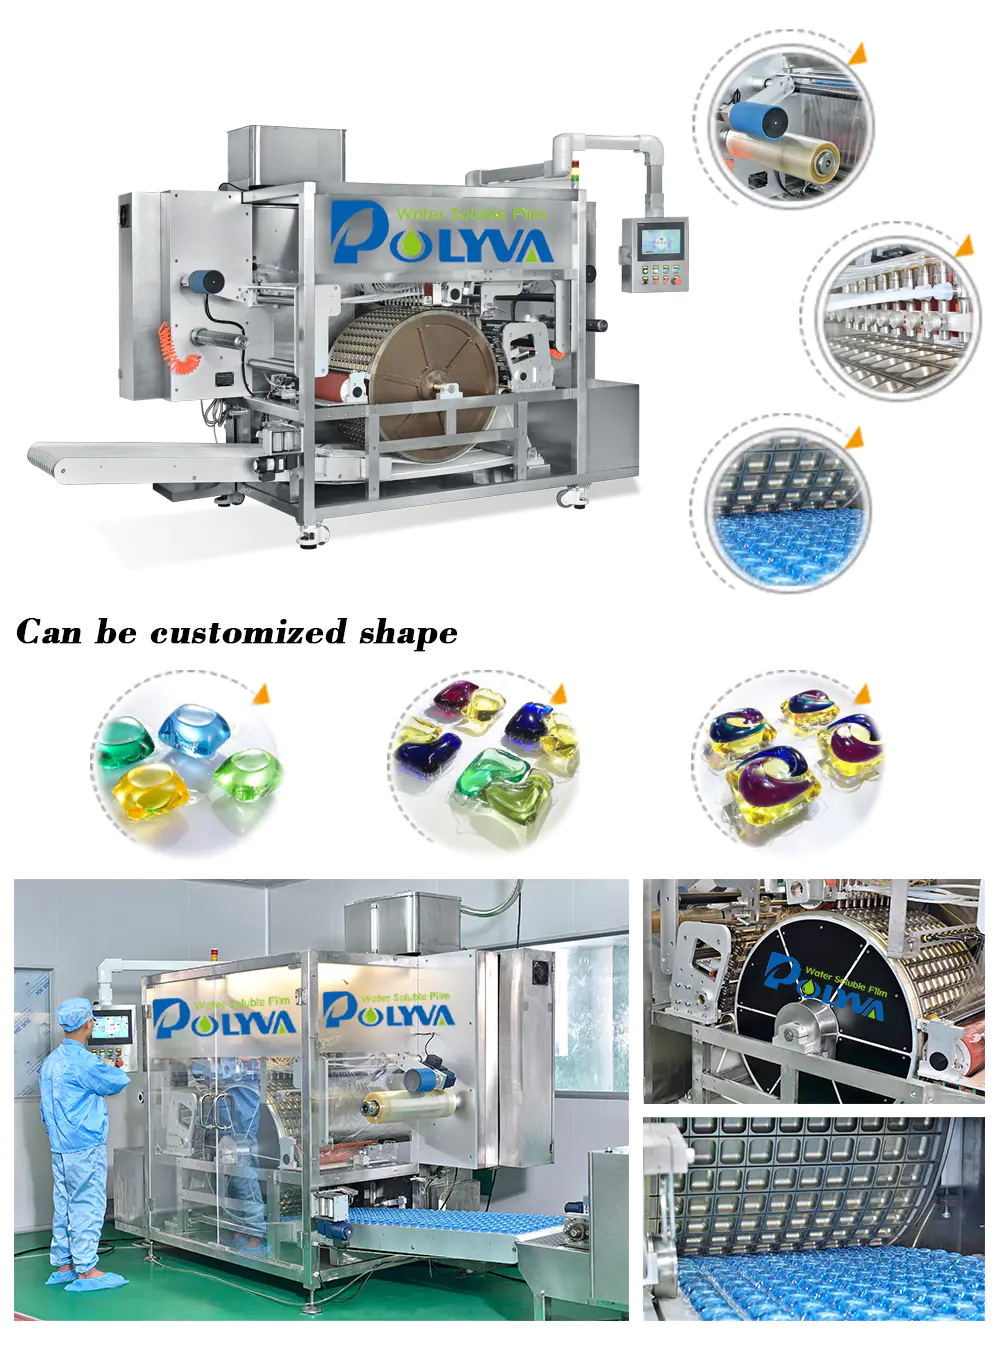 POLYVA eco-friendly water soluble packaging personalized for liquid pods